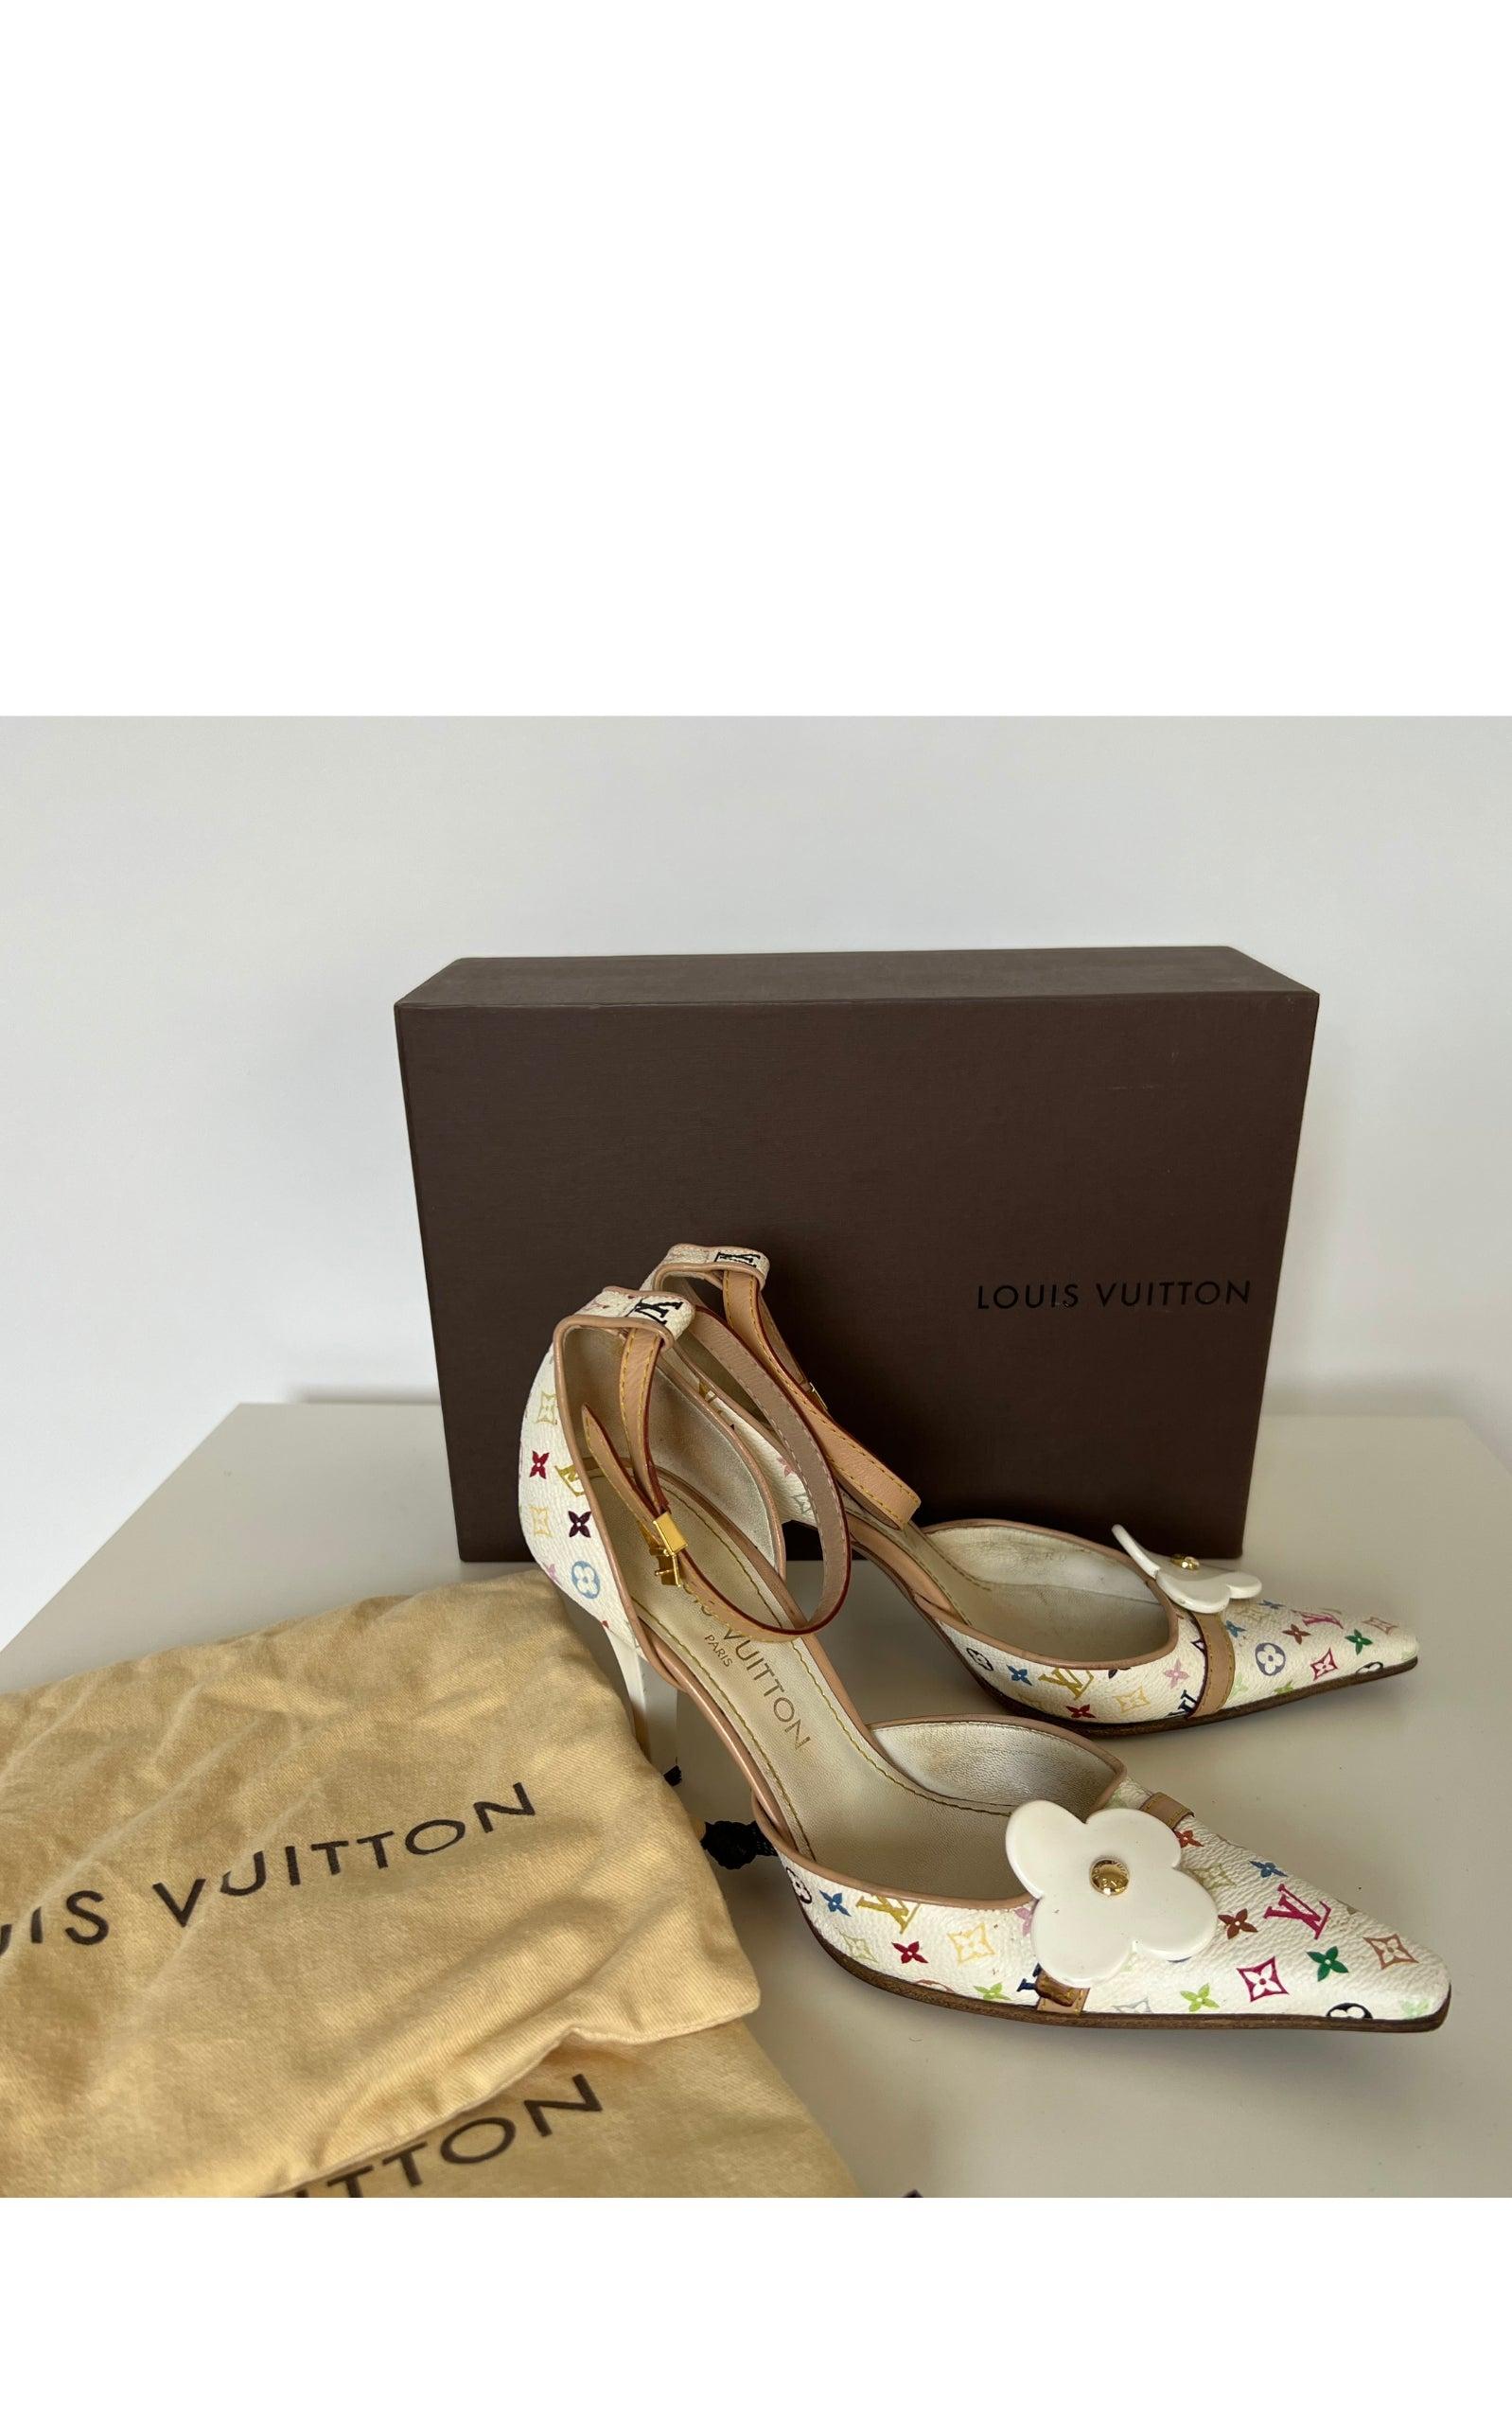 Louis Vuitton, Shoes, Like New In Original Box Louis Vuitton Shoes With  Canvas Red And Black Colors